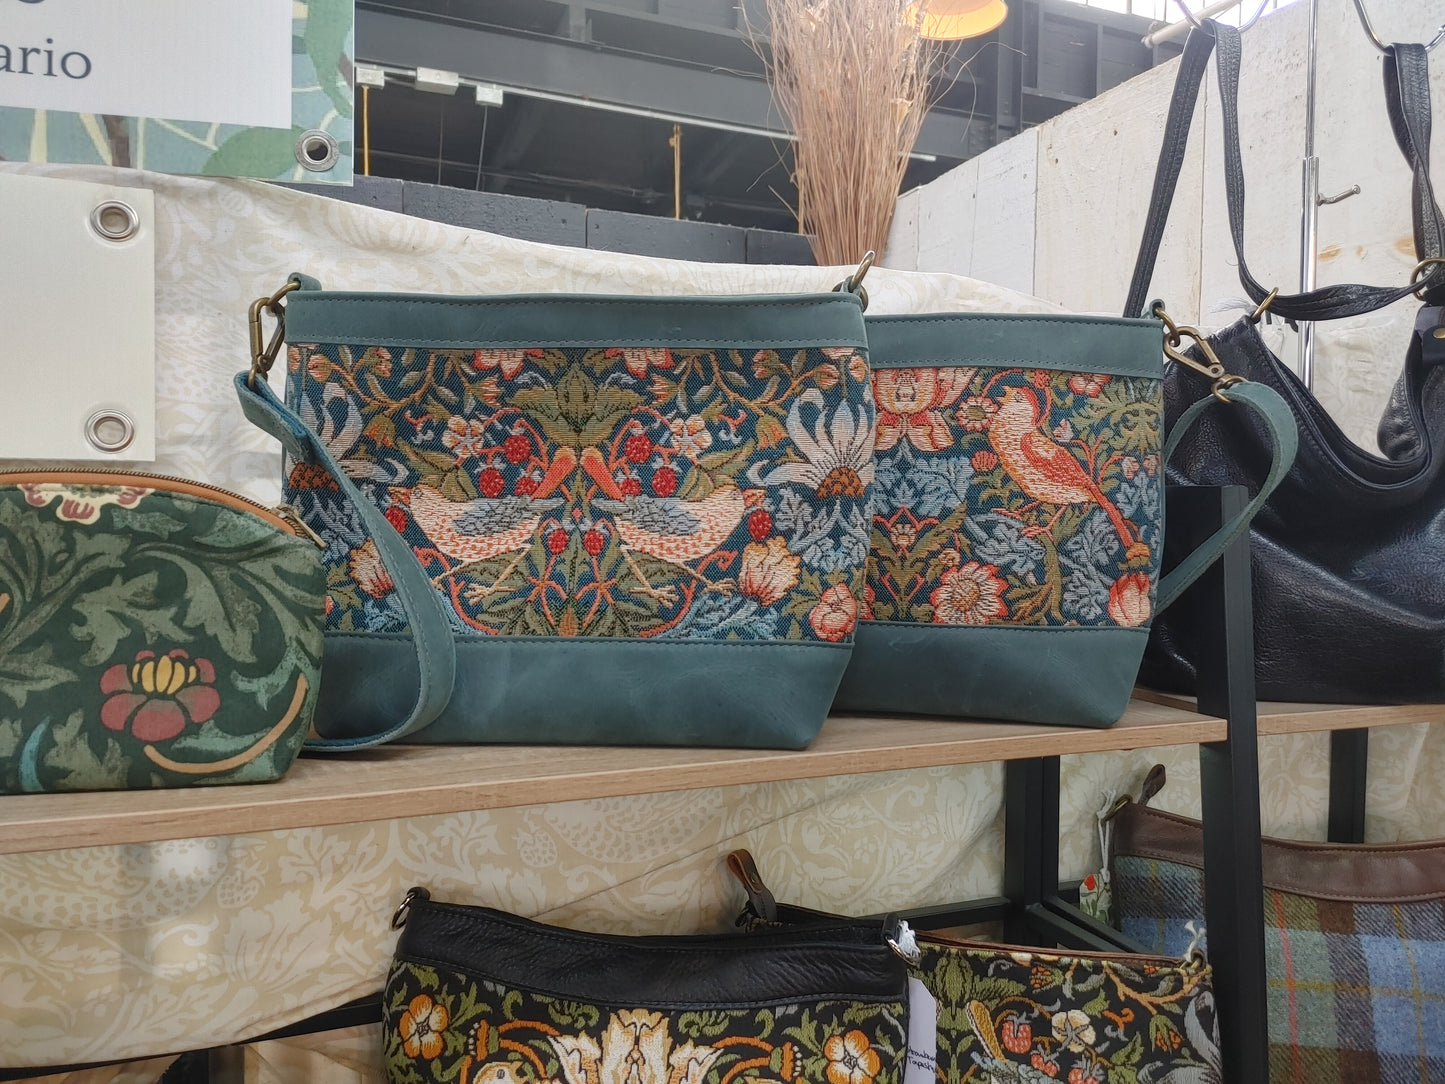 Sapling Zippered Handbag in Teal Leather with Tapestry